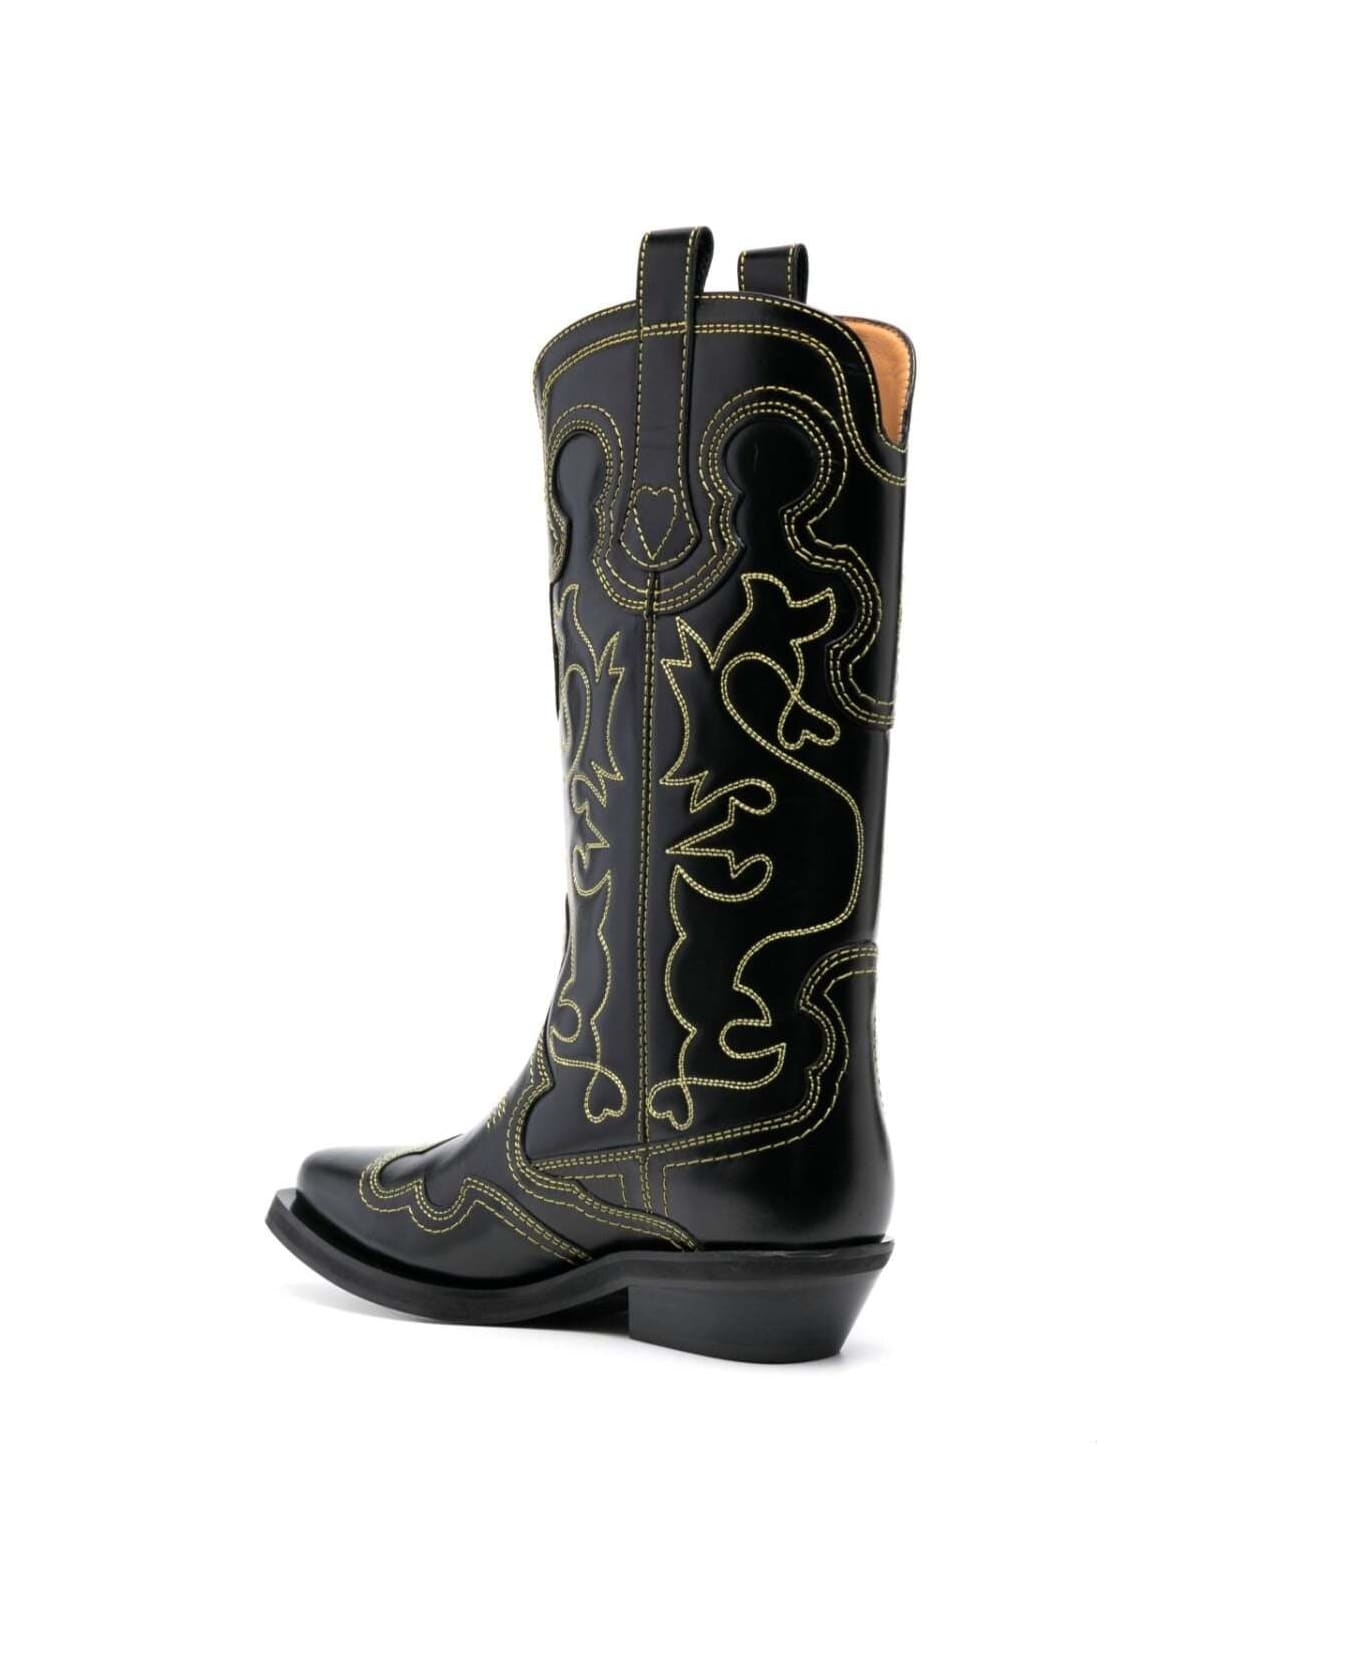 Ganni Black 'cowboy' Boots With Contrasting Embroidered Stitching In Leather Woman - Black